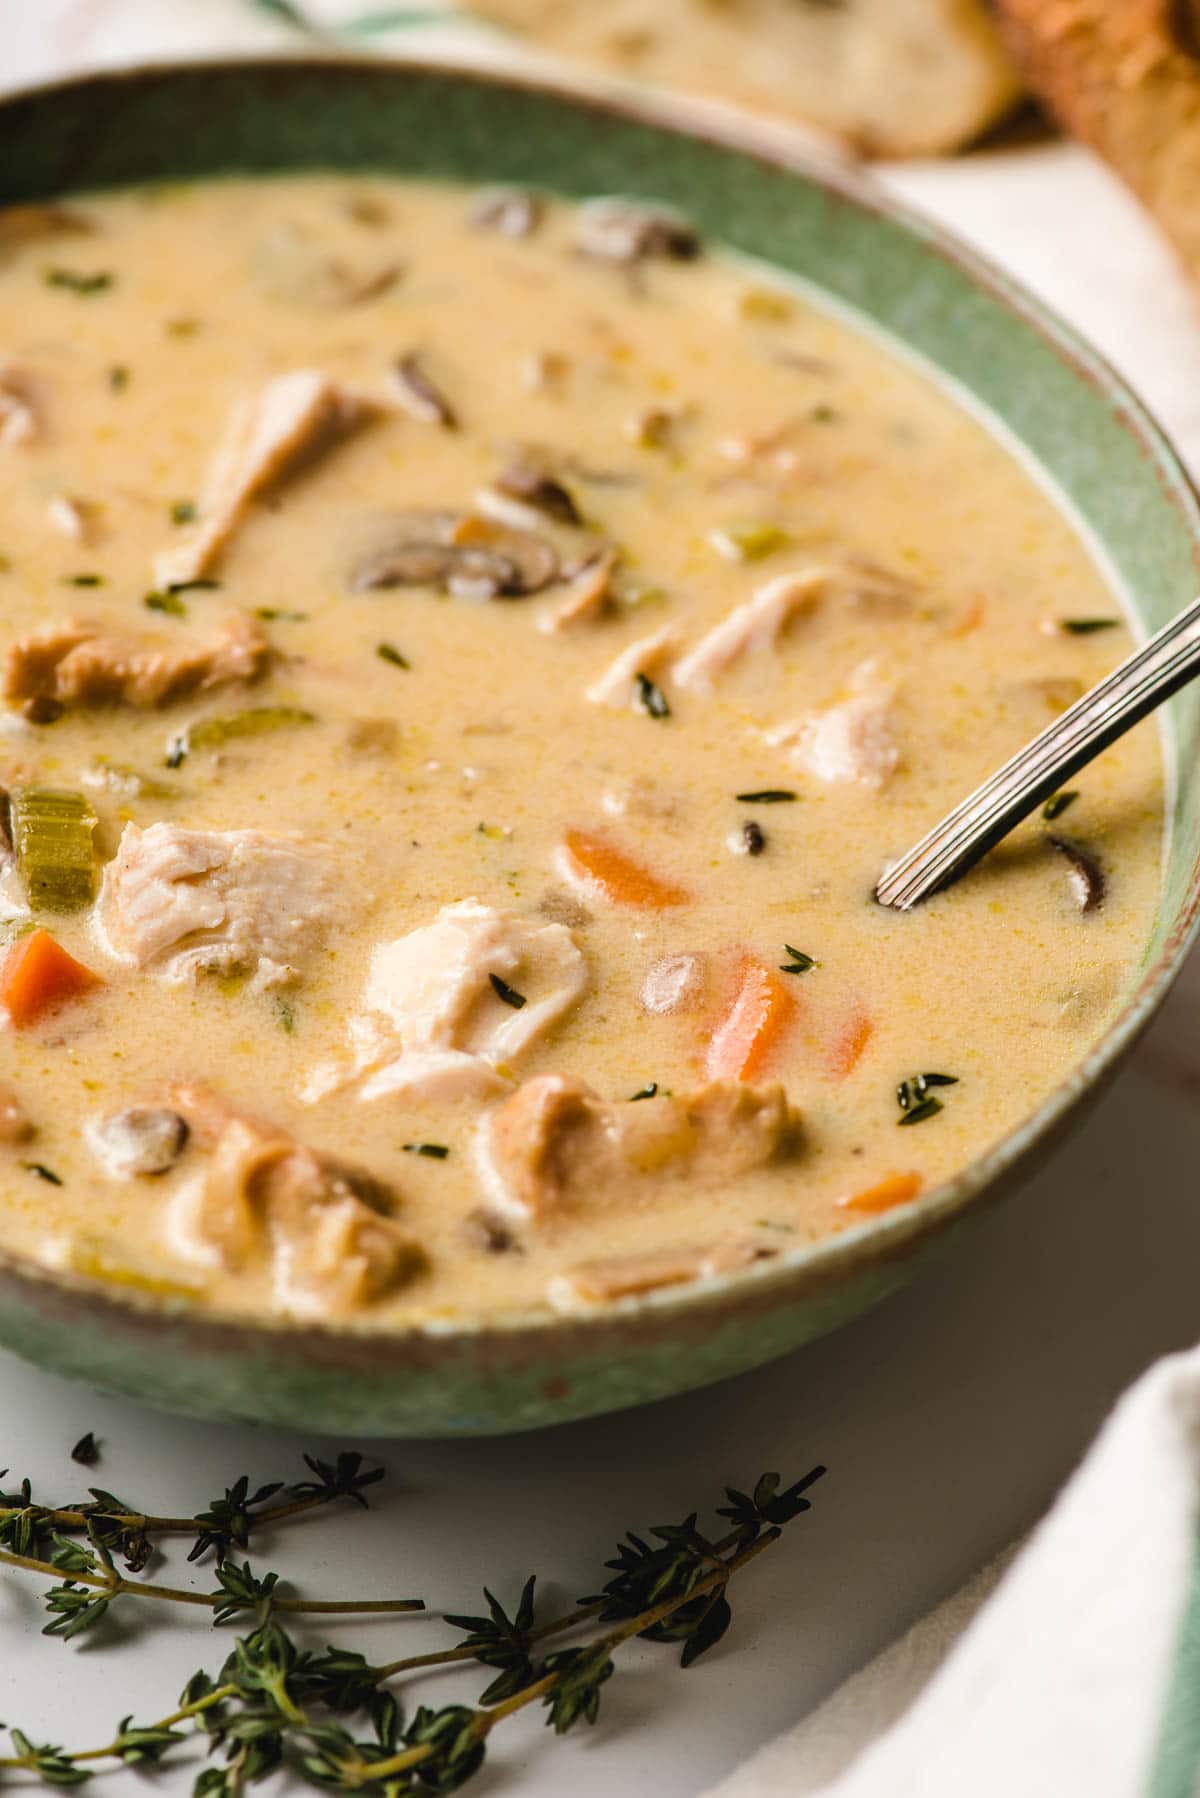 Creamy Turkey Soup in a green bowl with a spoon dunked into it.